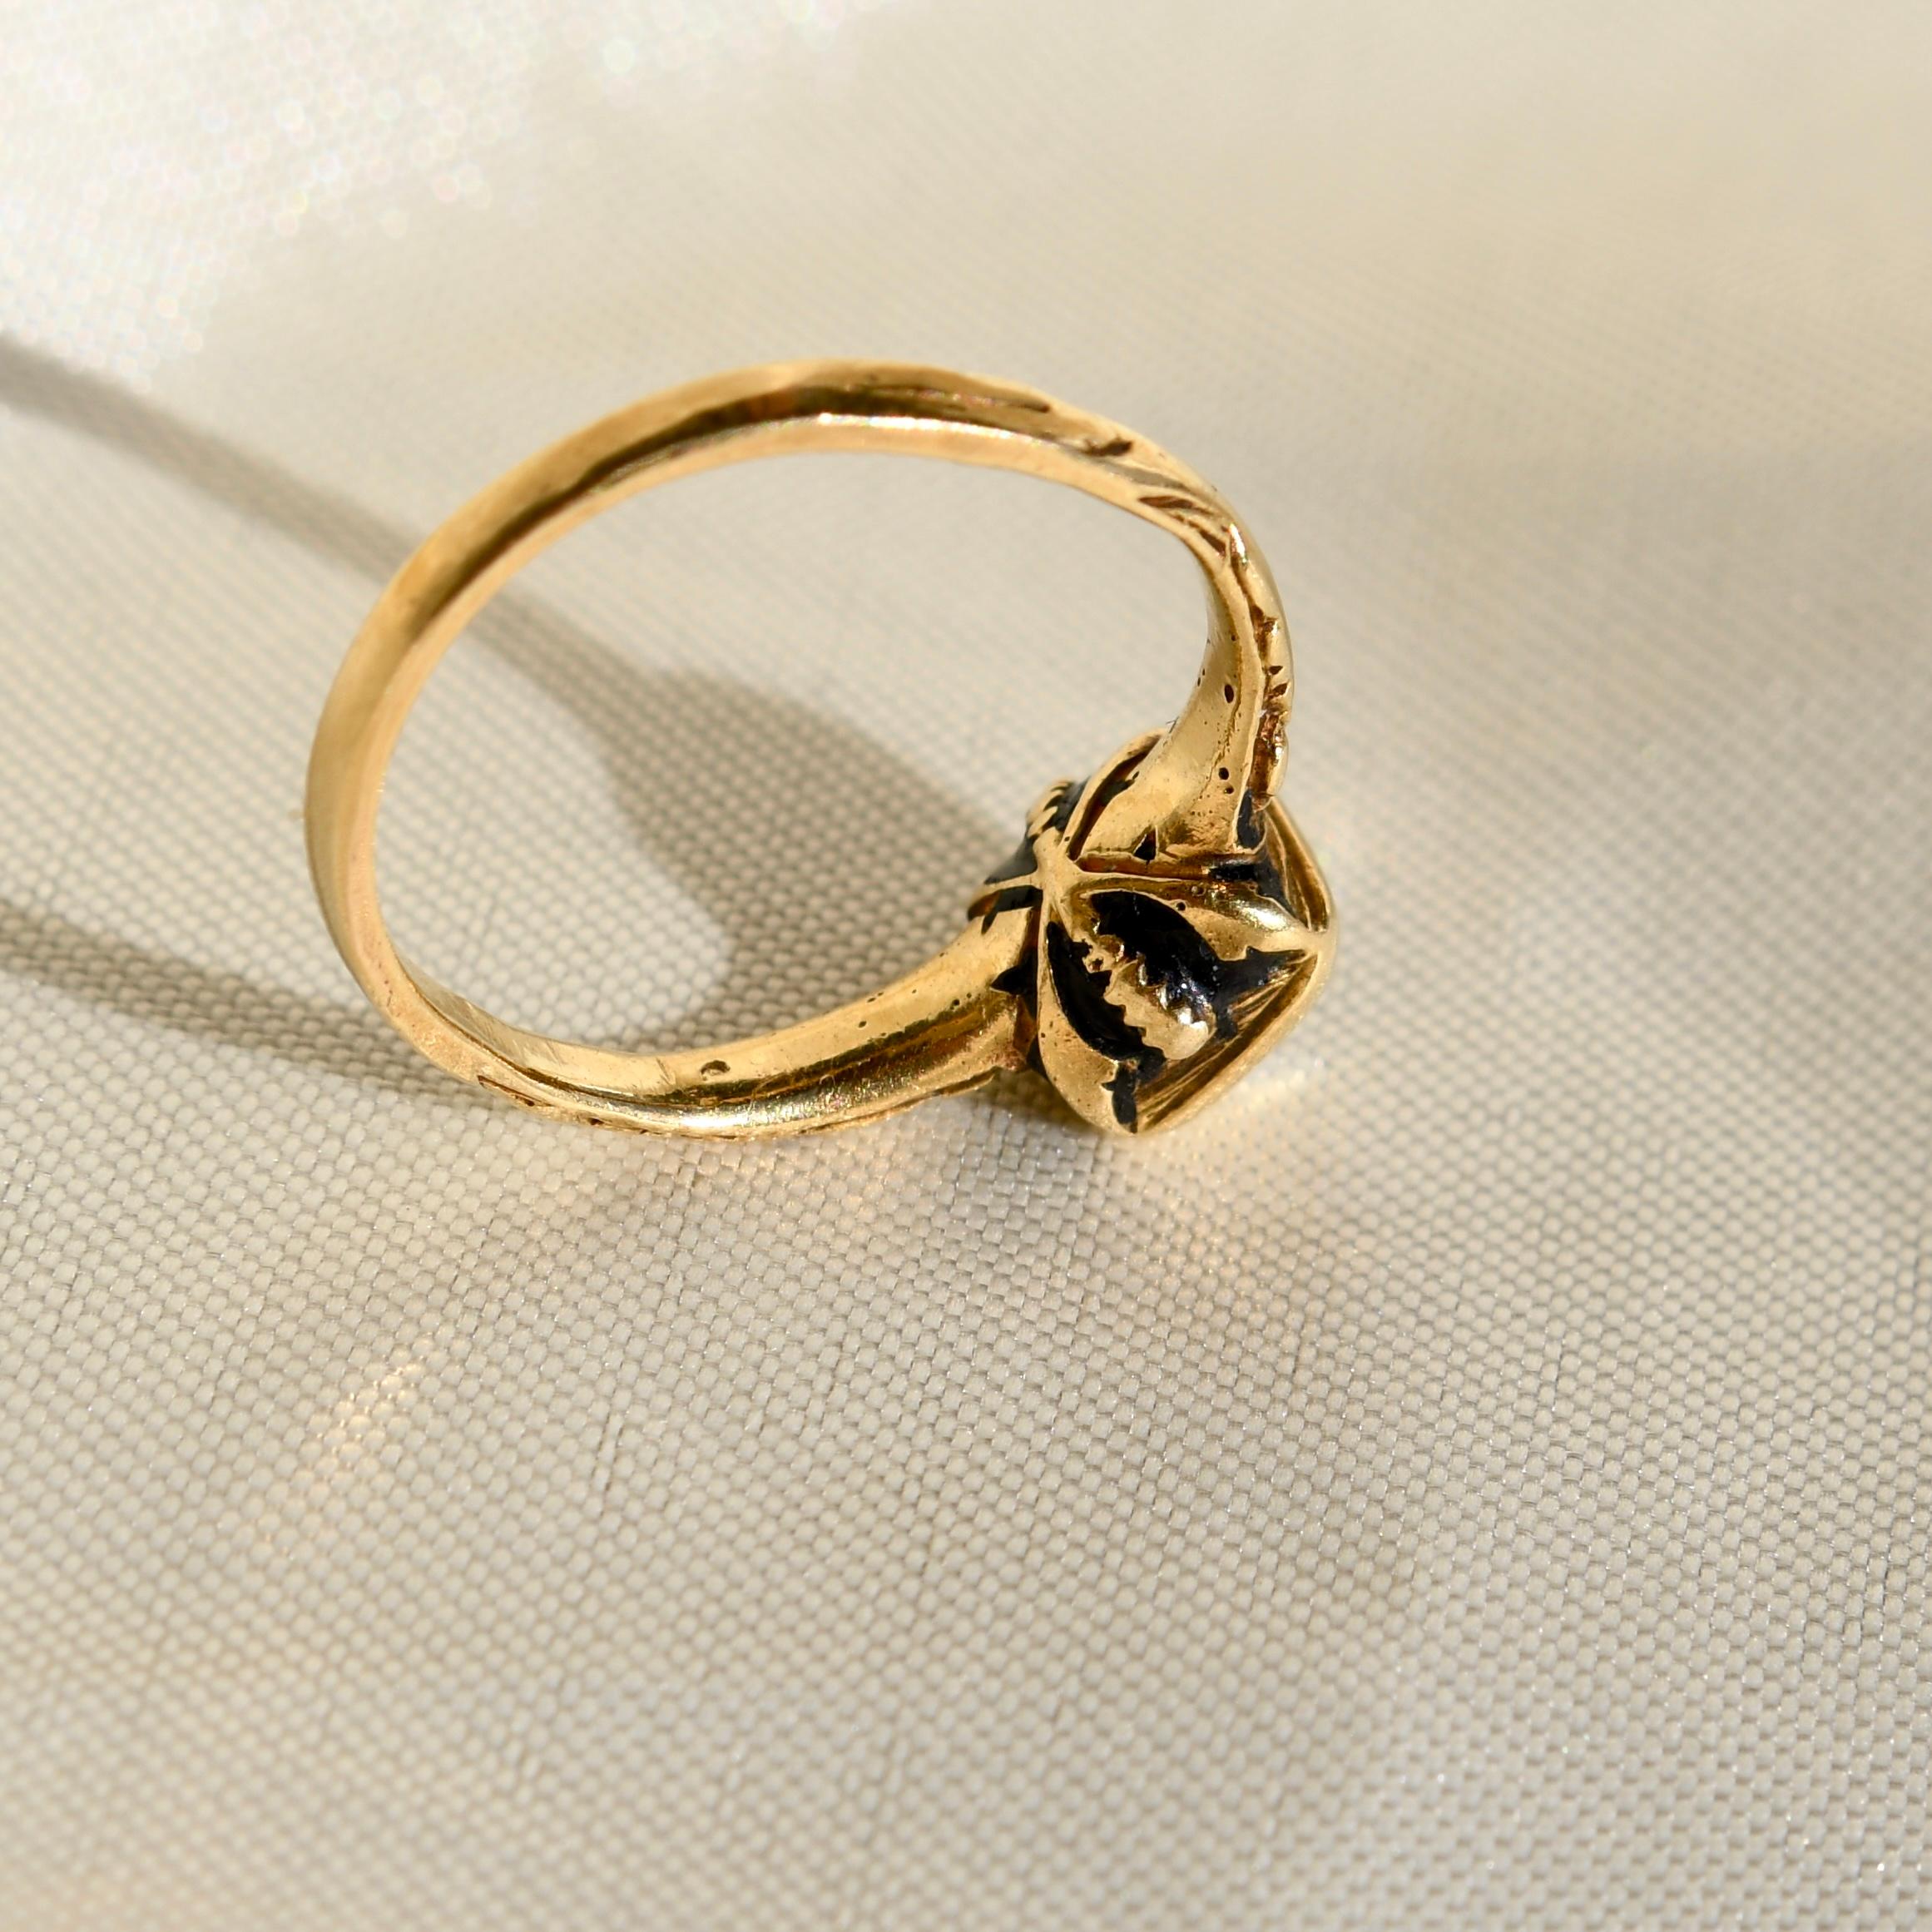 Renaissance gold and diamond ring with enamel, 16th century  For Sale 1